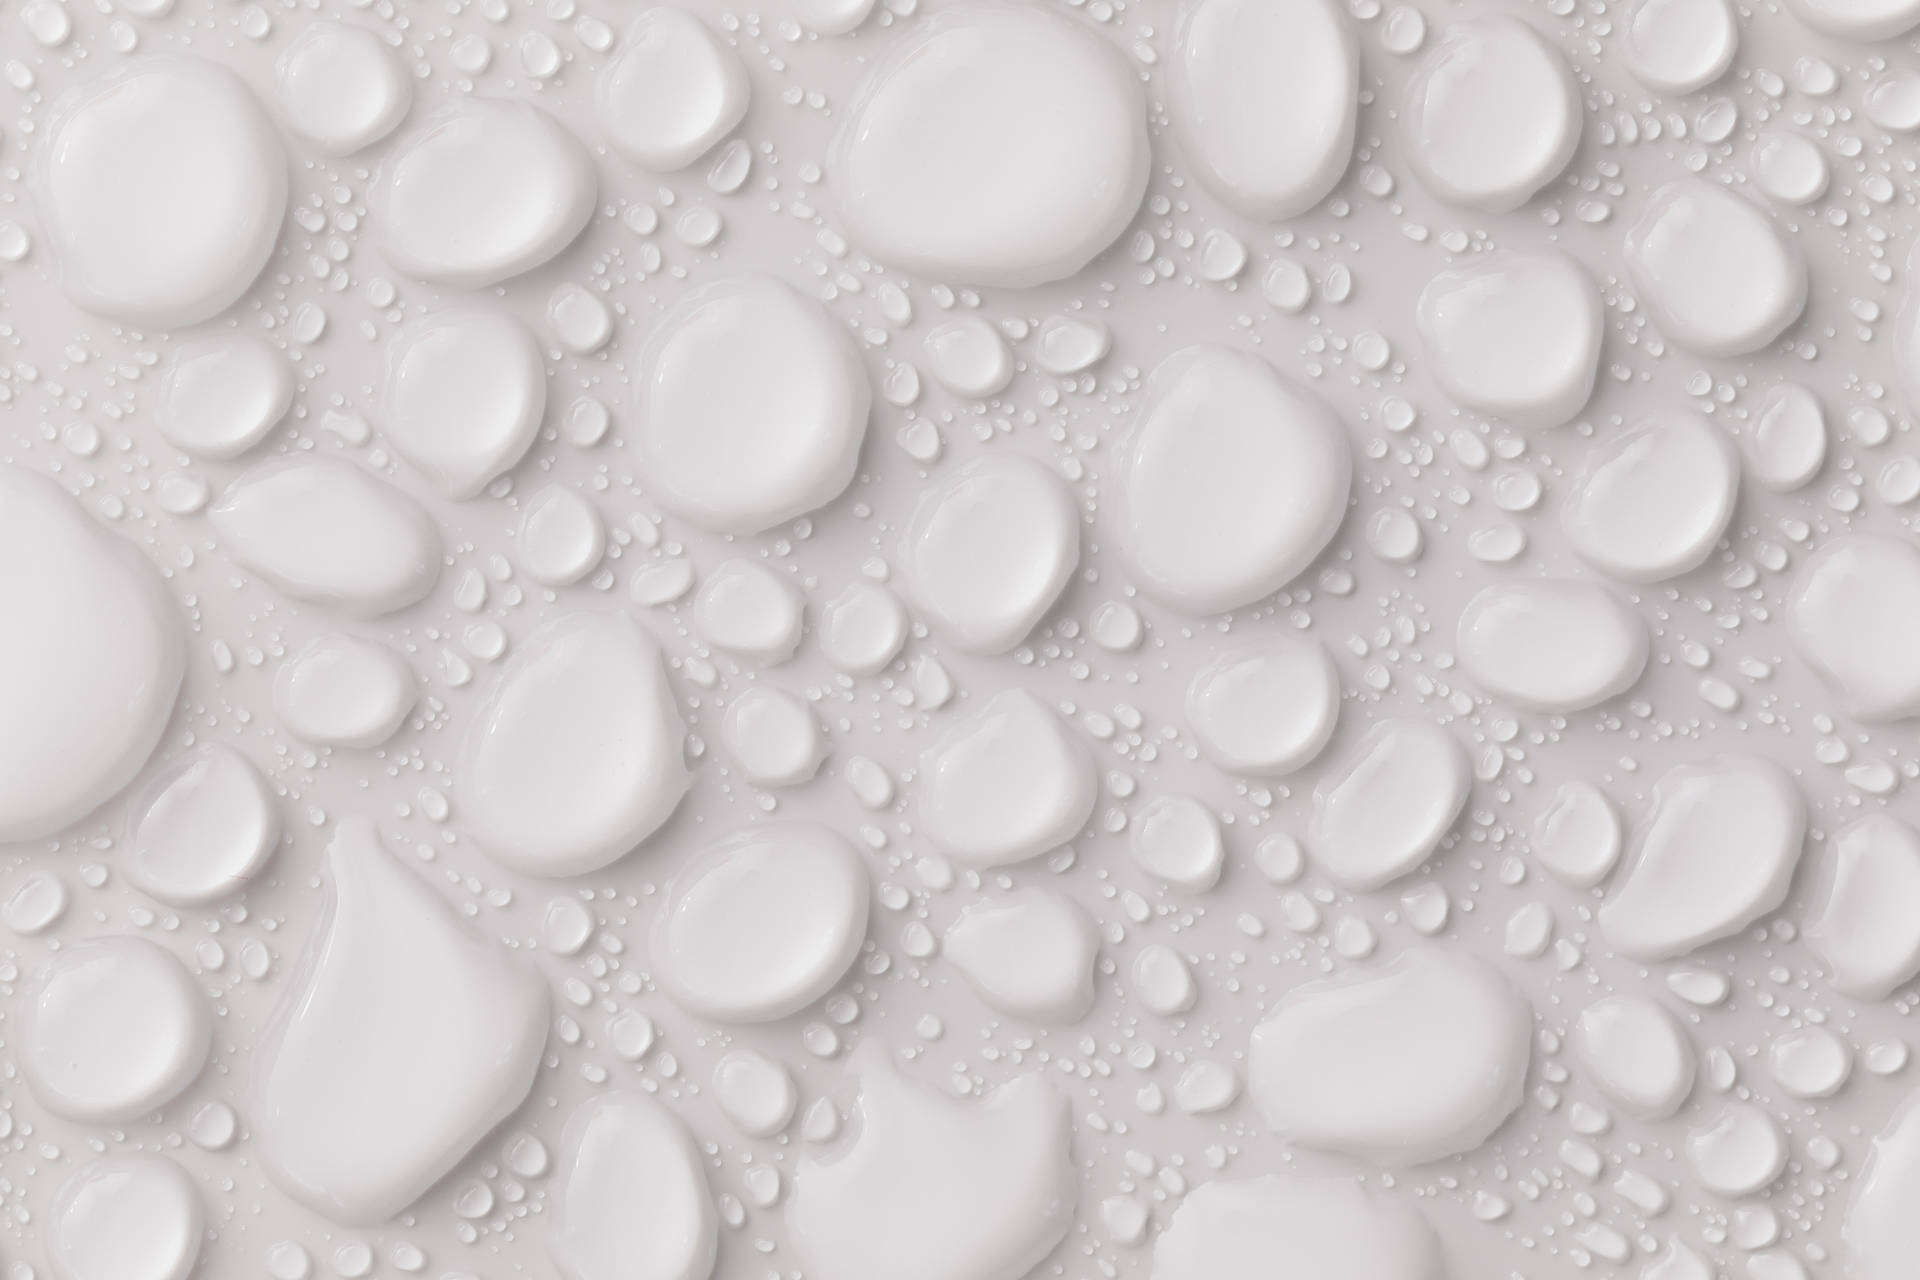 White Hd Waterdrops Background